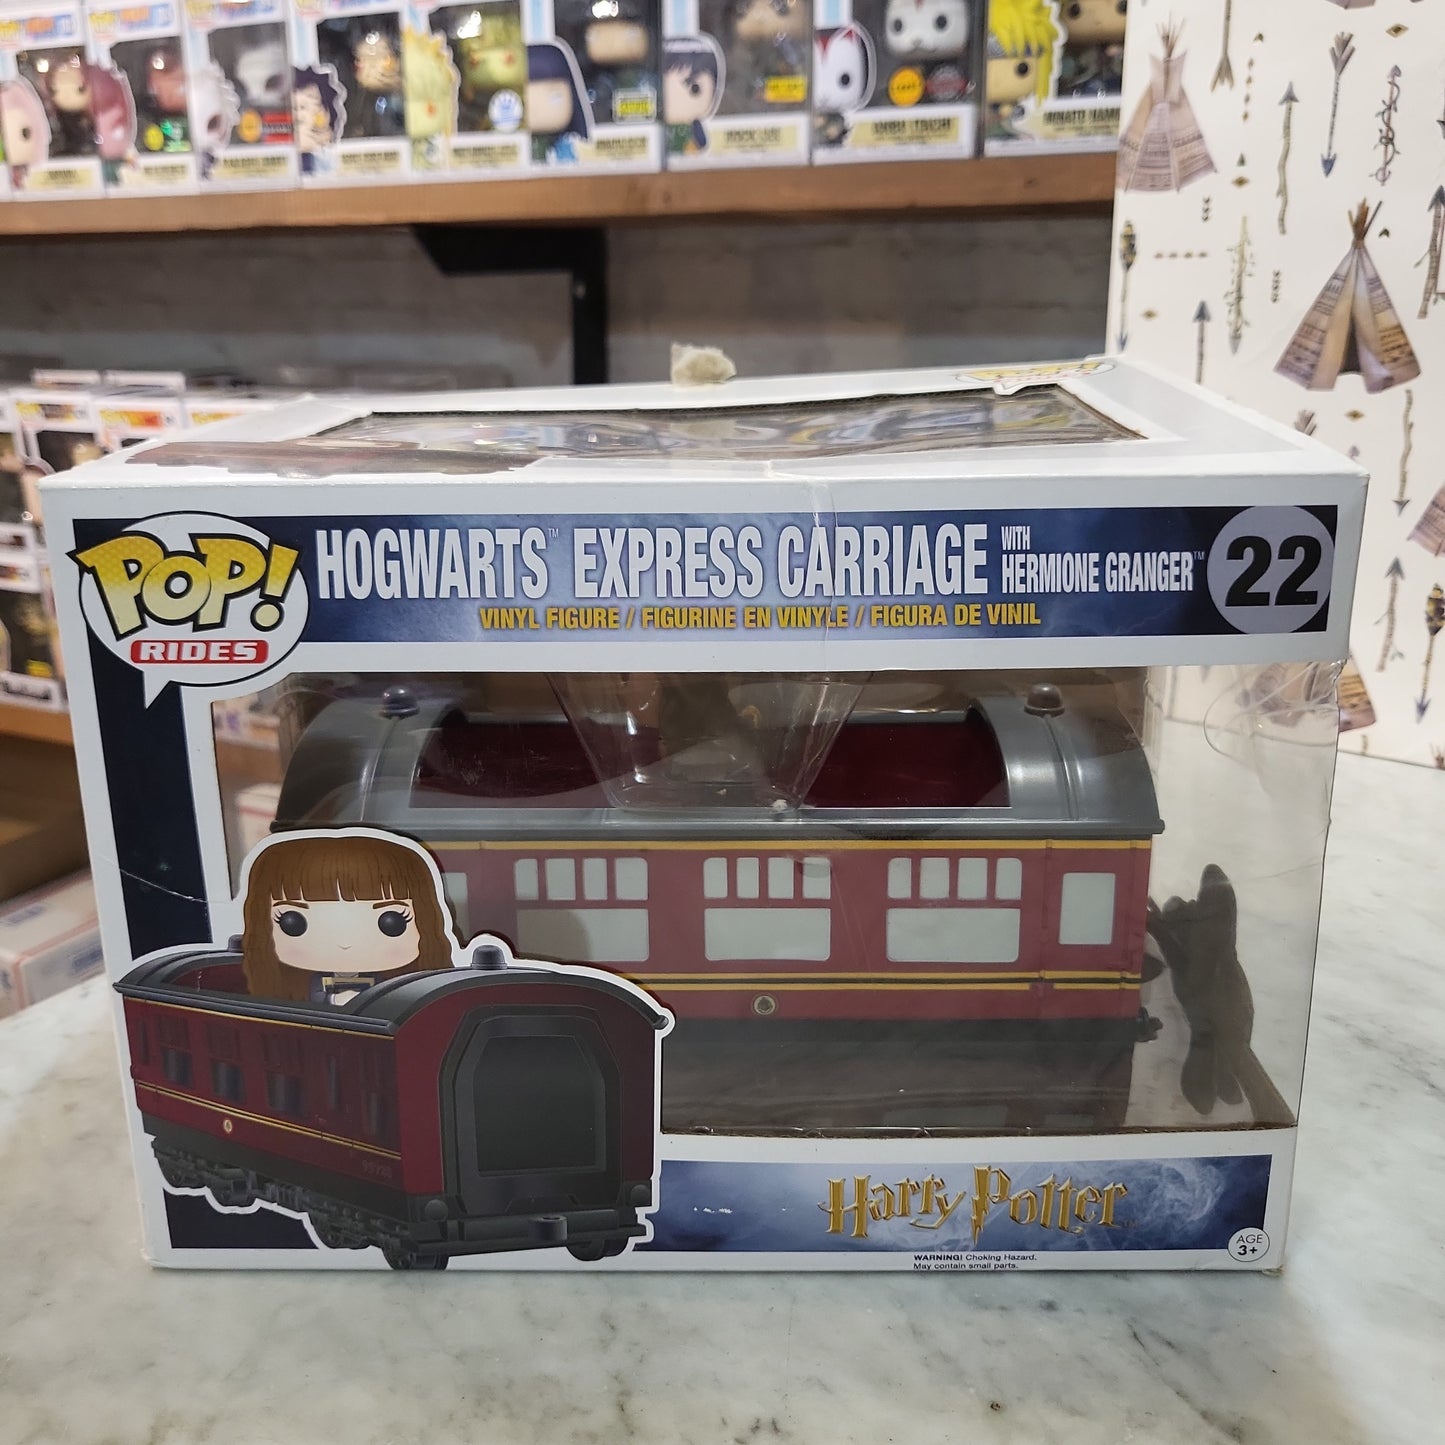 Harry Potter - Hogwarts Express Carriage with Hermione [Damaged Box] #22